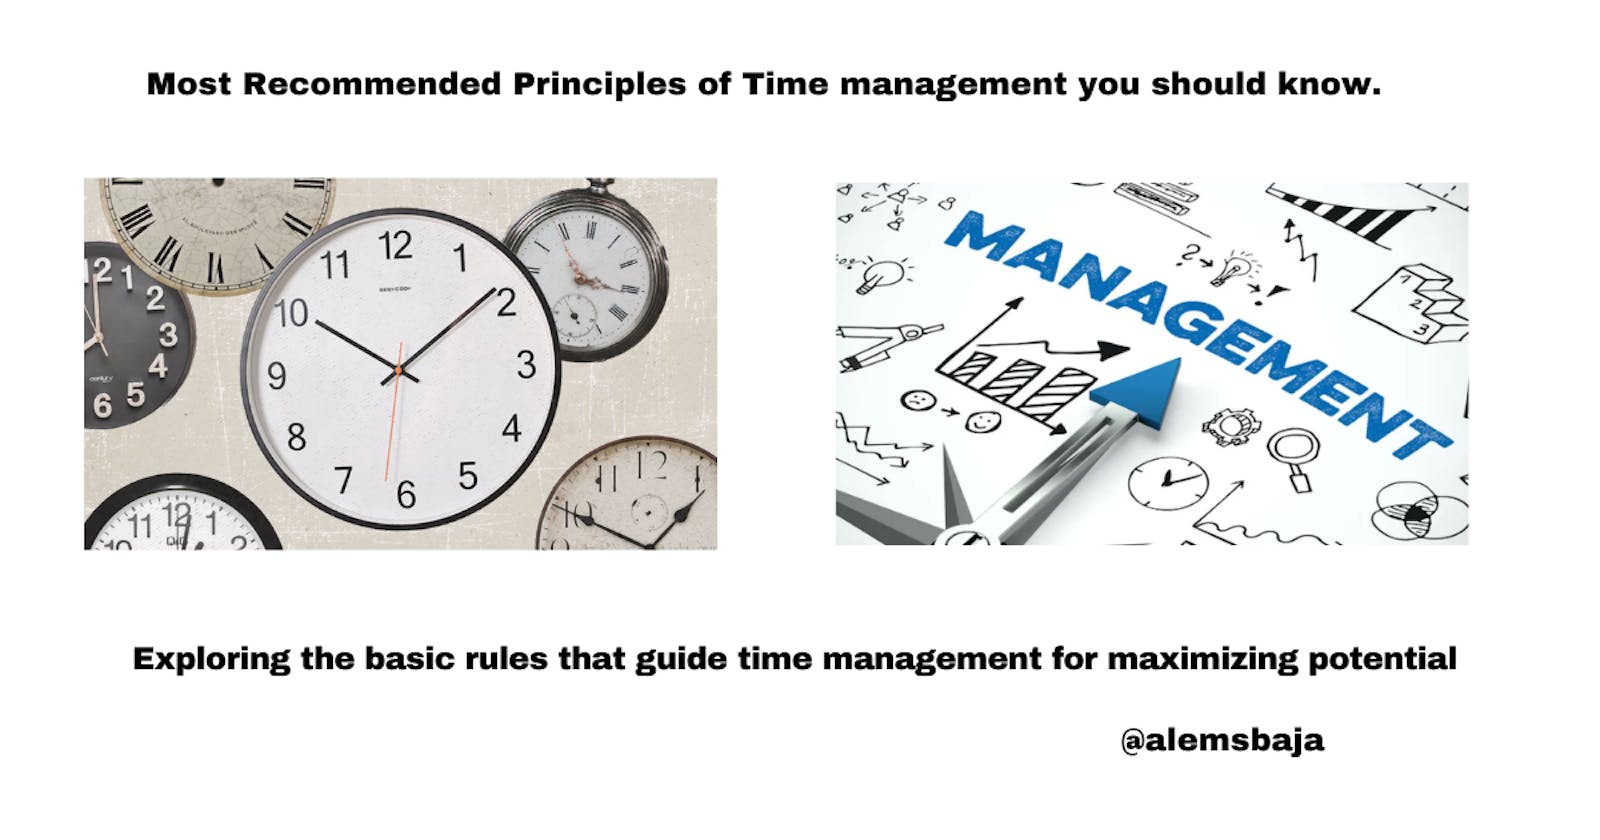 Most Recommended Principles of Time management you should know.